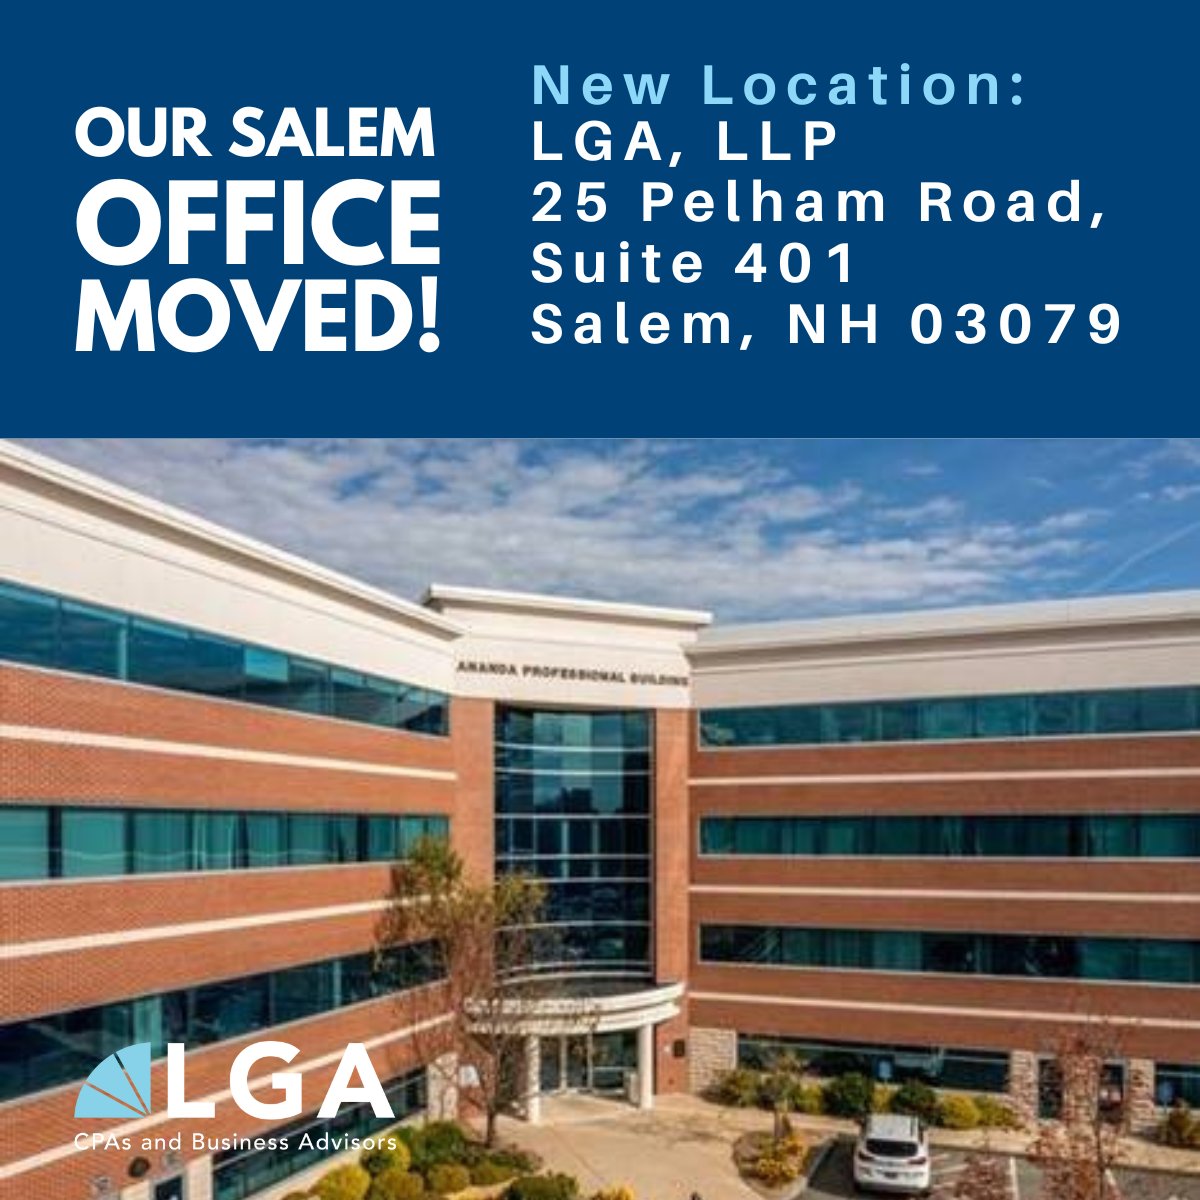 LGA's Salem, NH, office has moved to a new location. Please use the following address moving forward for visits and correspondence with this office. LGA Salem : LGA, LLP 25 Pelham Rd, Suite 401 Salem, NH 03079